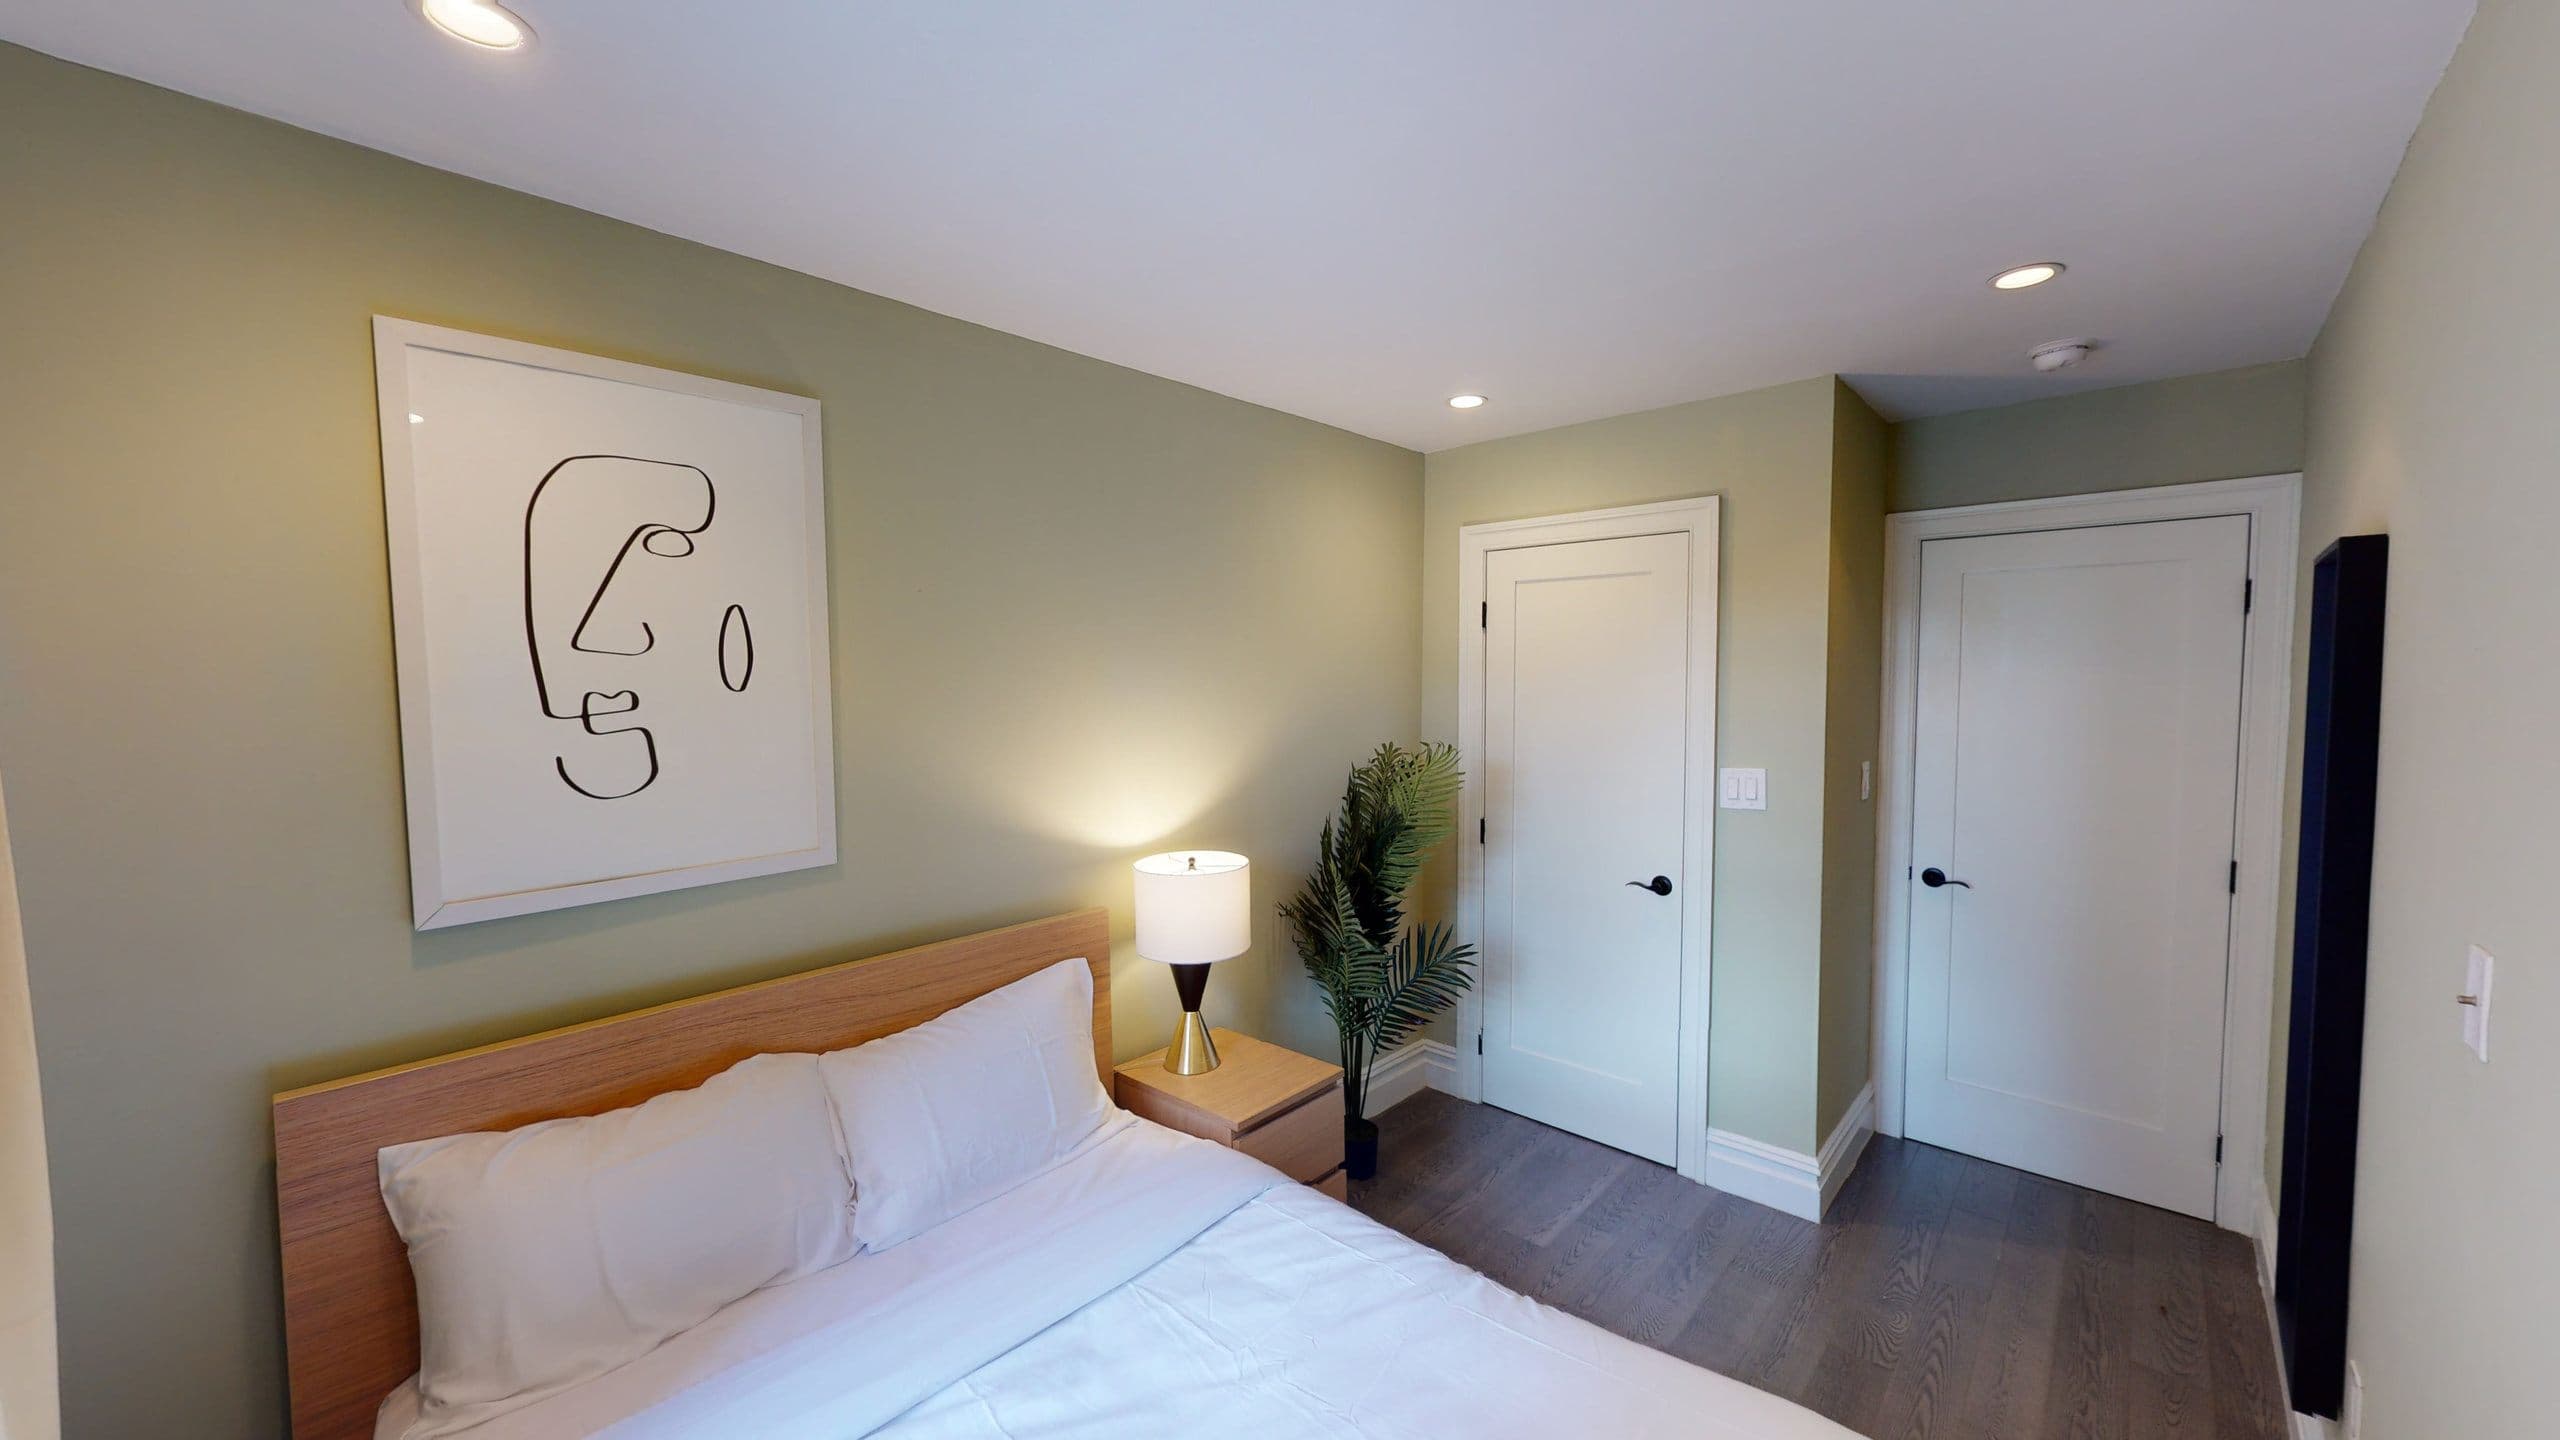 Photo 5 of #1530: Queen Bedroom A at June Homes